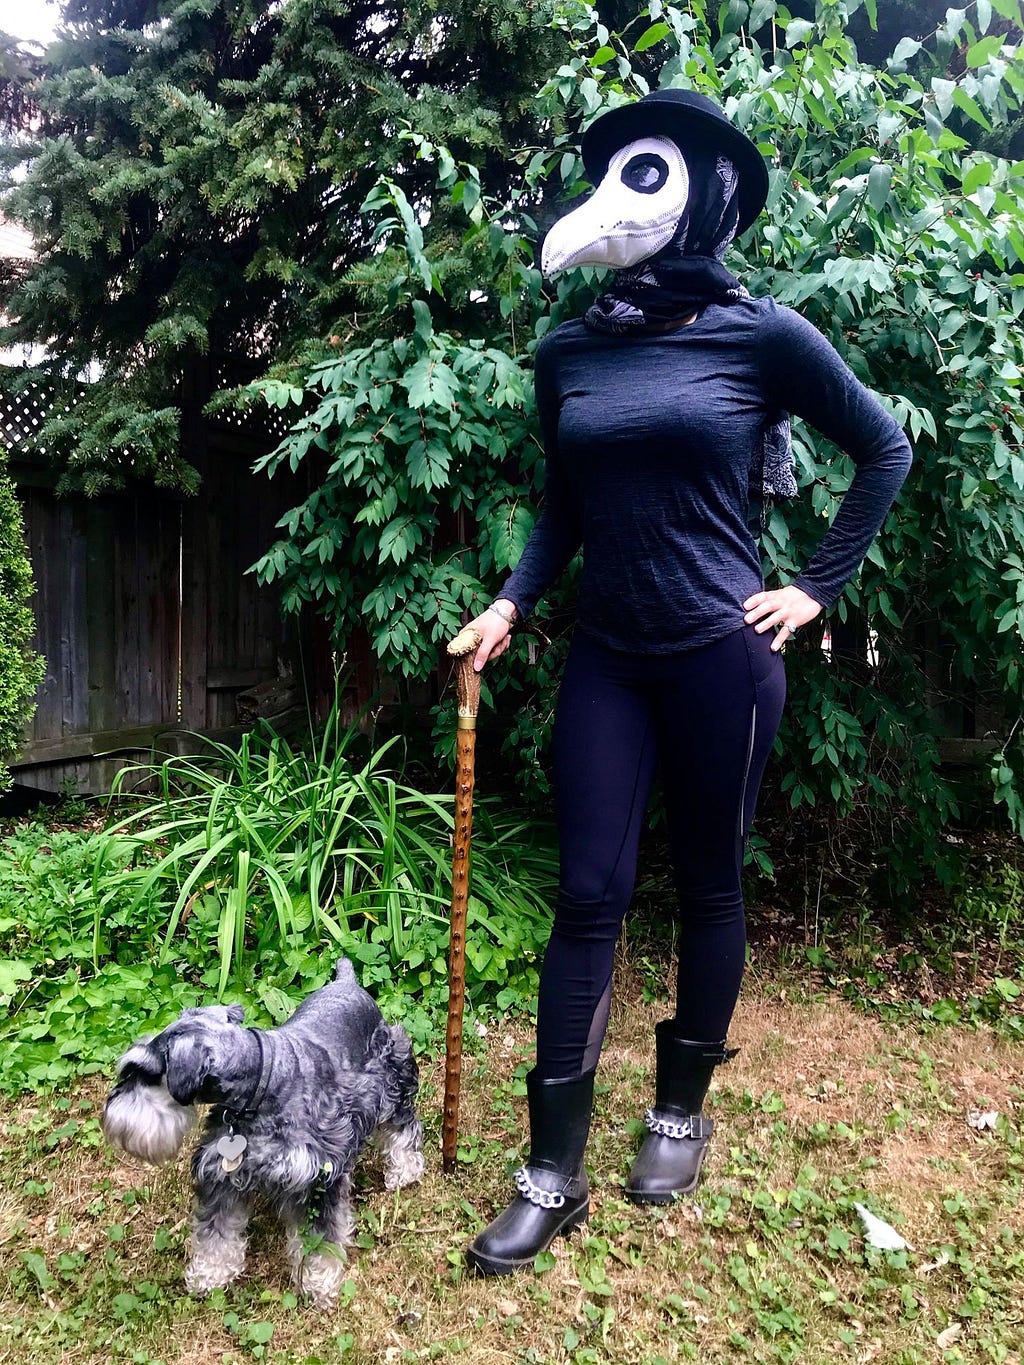 A woman dressed in black and a textile mask stands confidently by her service dog in front of greenery, right hand on cane.